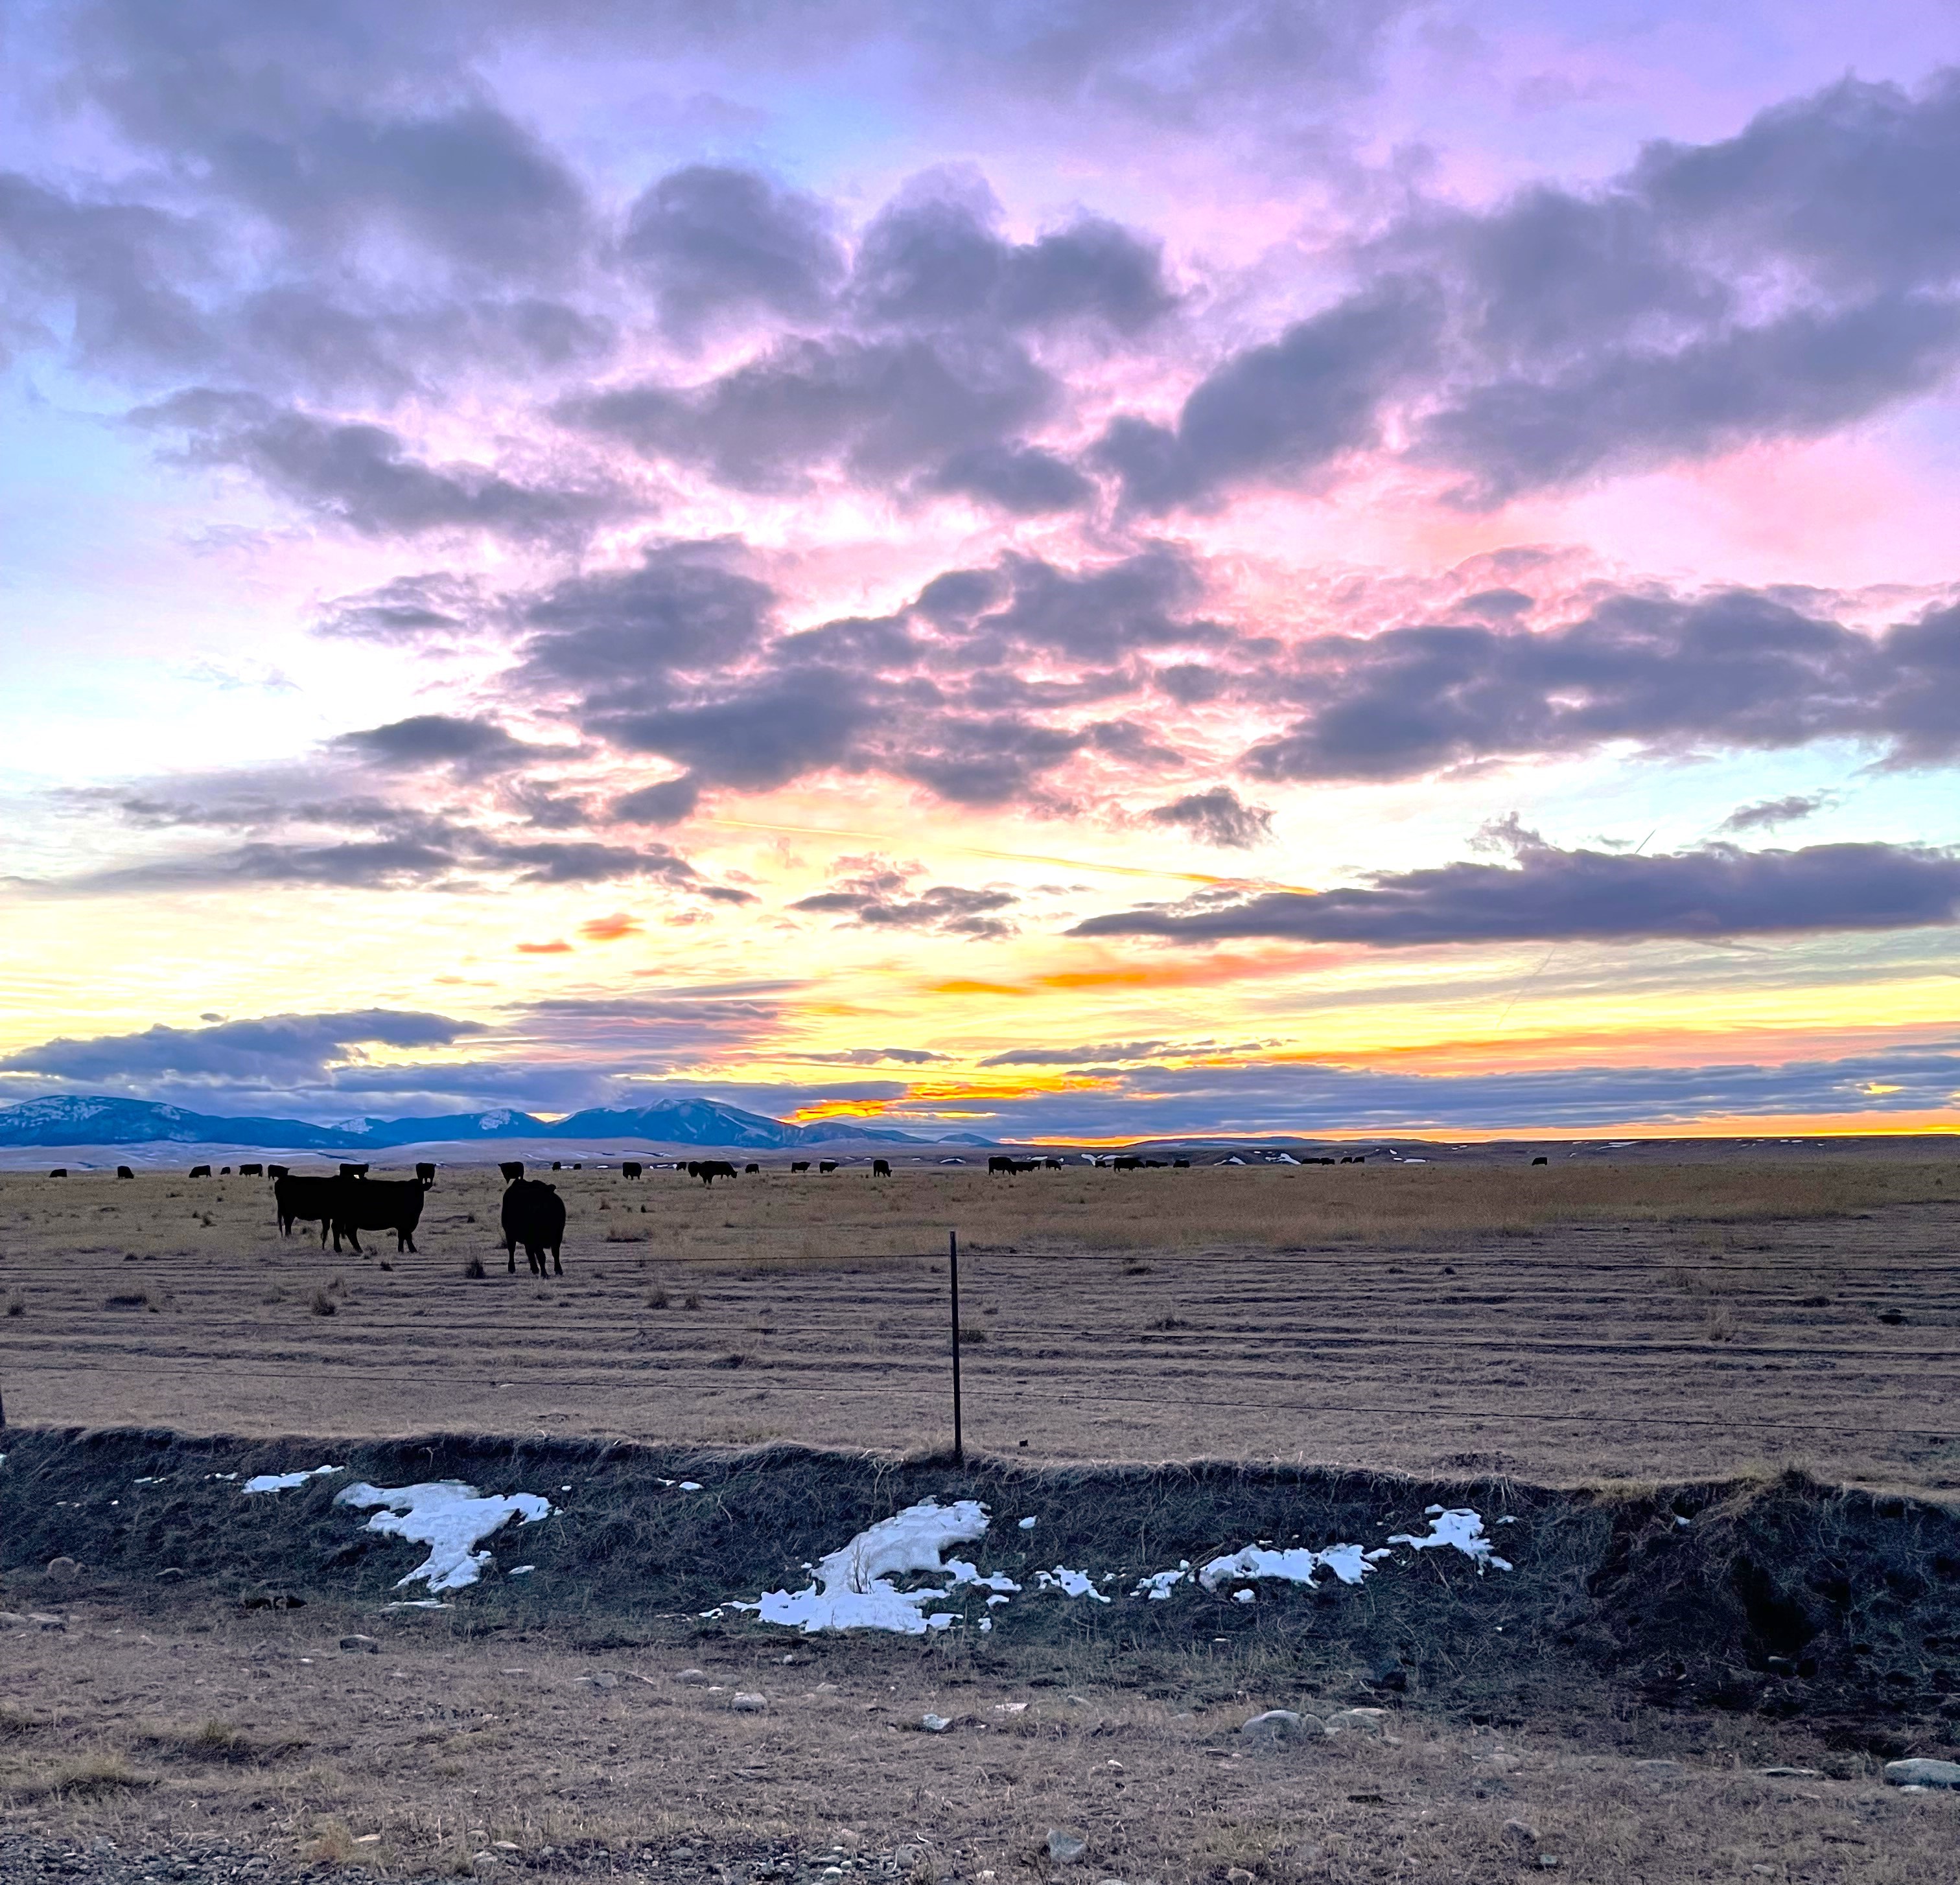 Cattle feeding on a cold morning while the sun begins to light up the morning sky